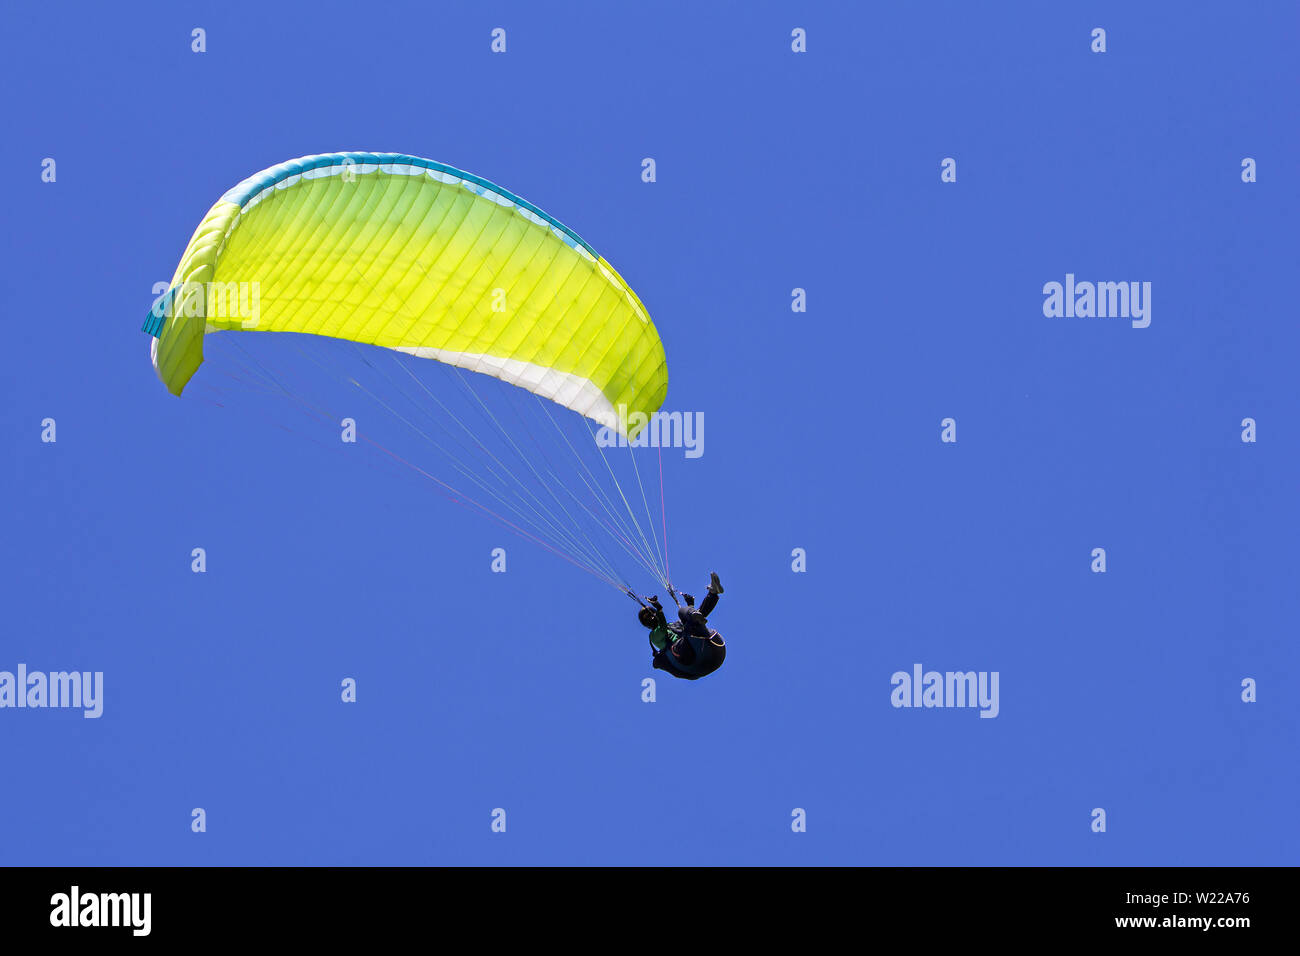 Paragliding in the blue sky as background extreme sport Stock Photo